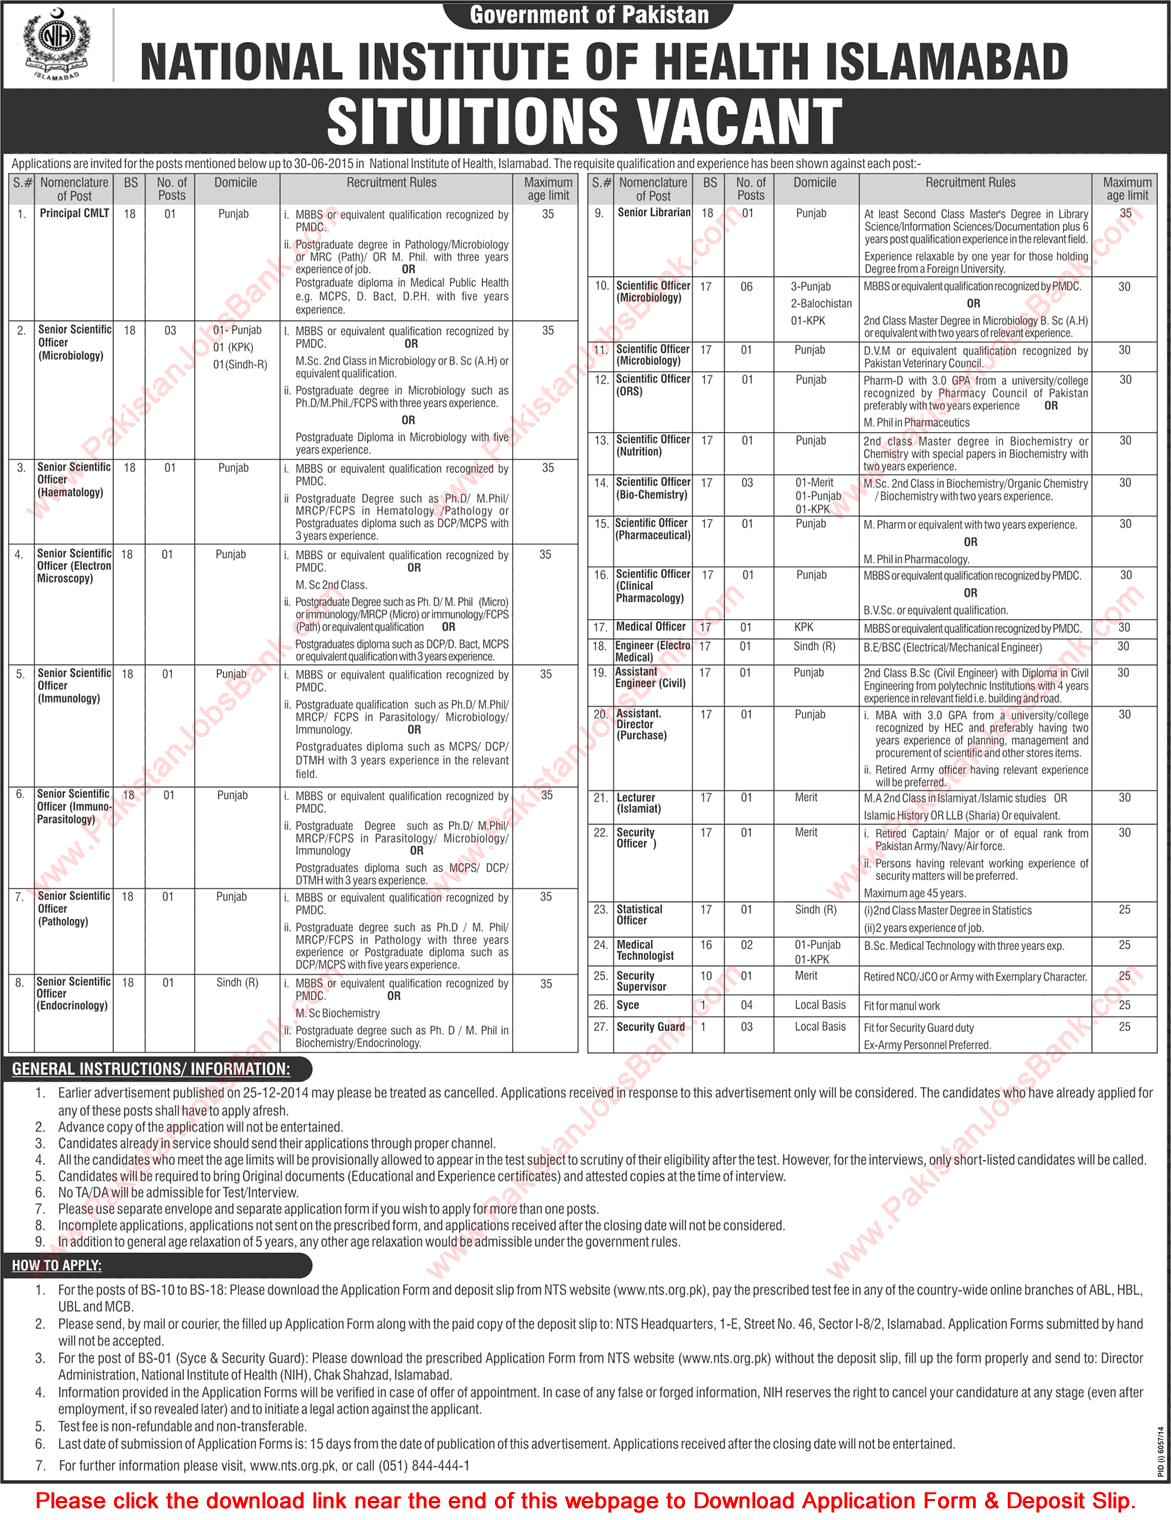 National Institute of Health Islamabad Jobs 2015 May NTS Application Form Download Latest / New